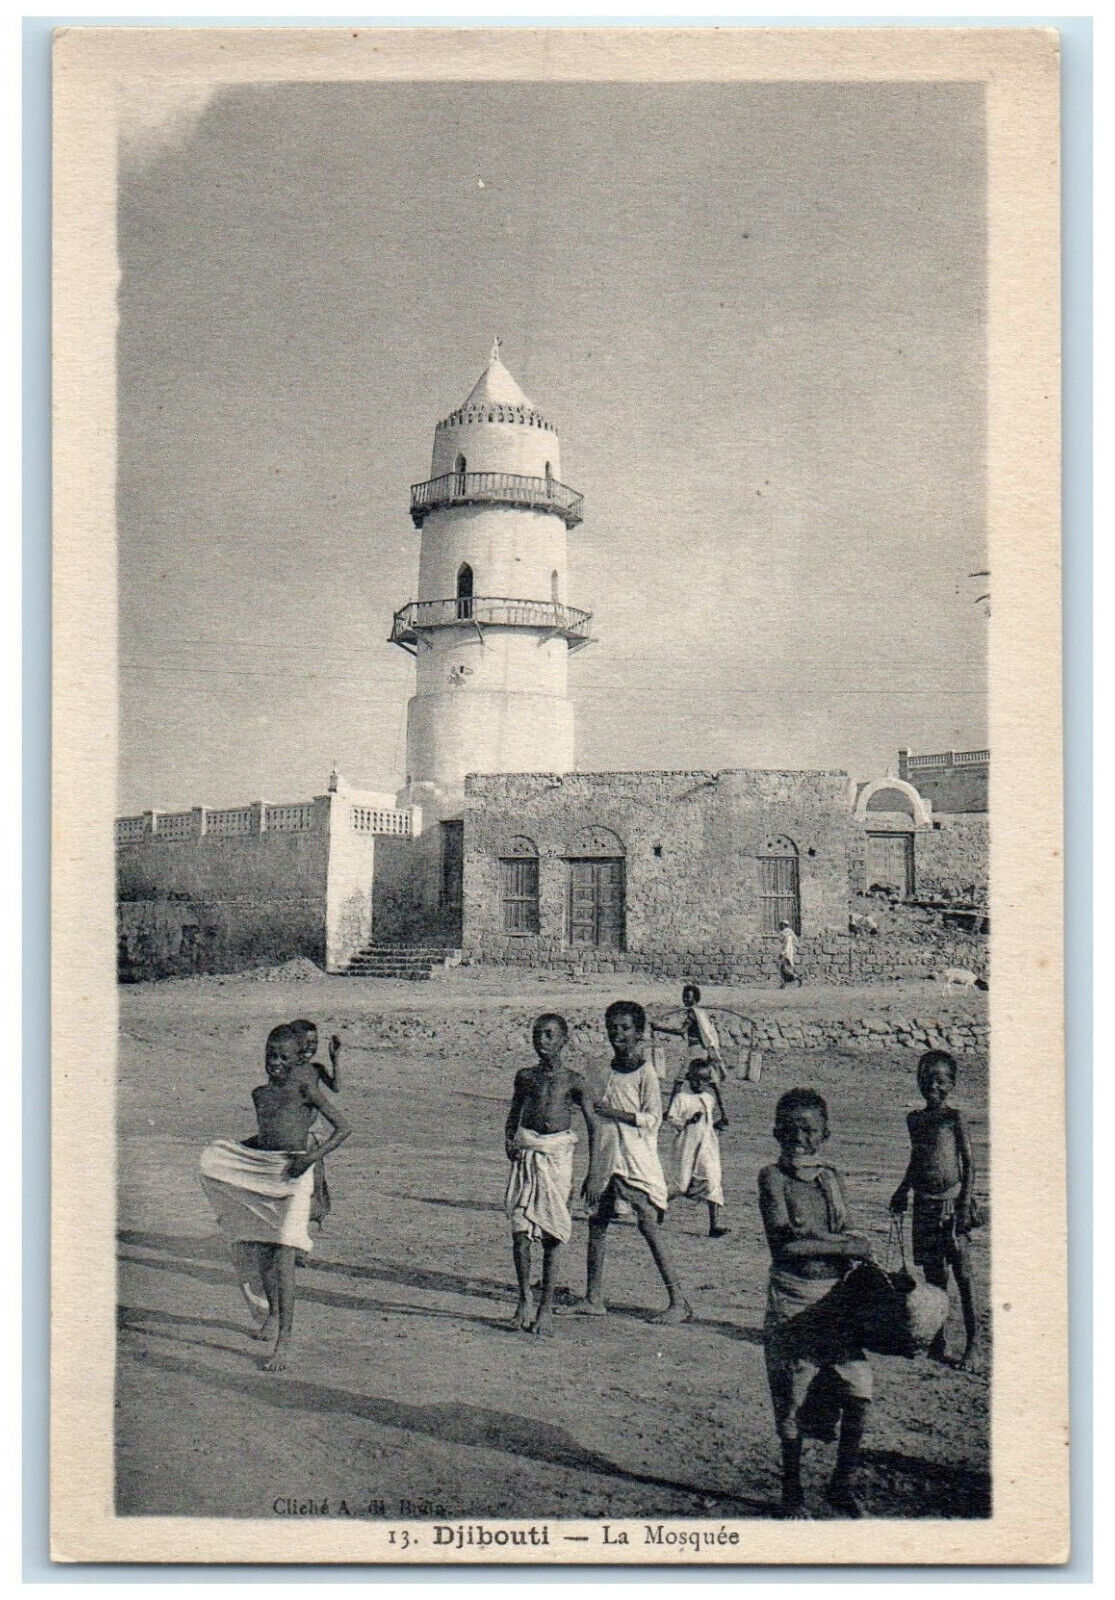 c1940's Kids Playing Smiling Scene at The Mosque Djibouti East Africa Postcard